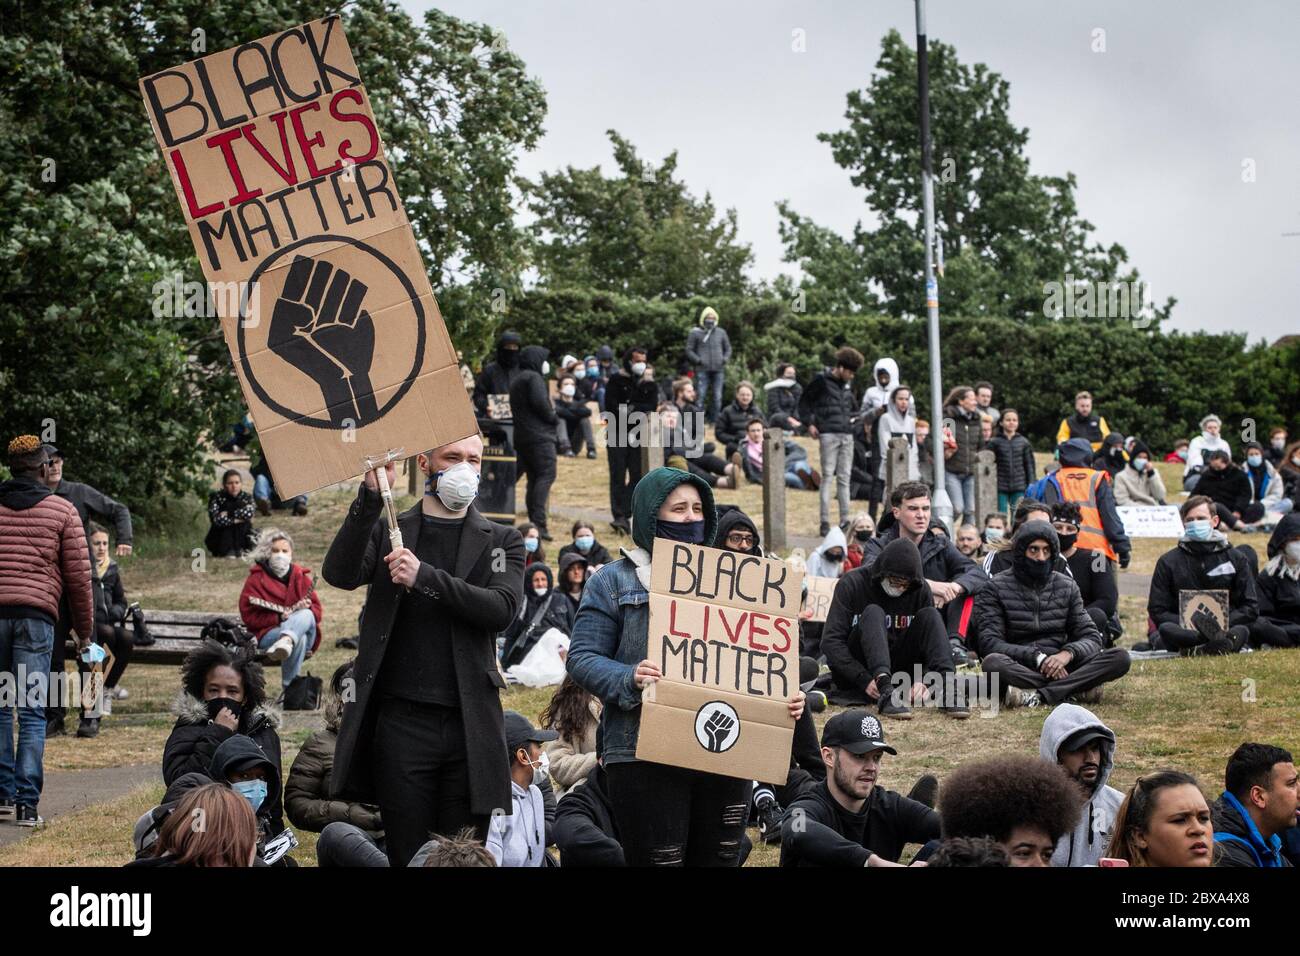 Protesters and demonstrators gather for BLM, Black Lives Matter protest and rally in hill in Hitchin, Hertfordshire, UK Stock Photo